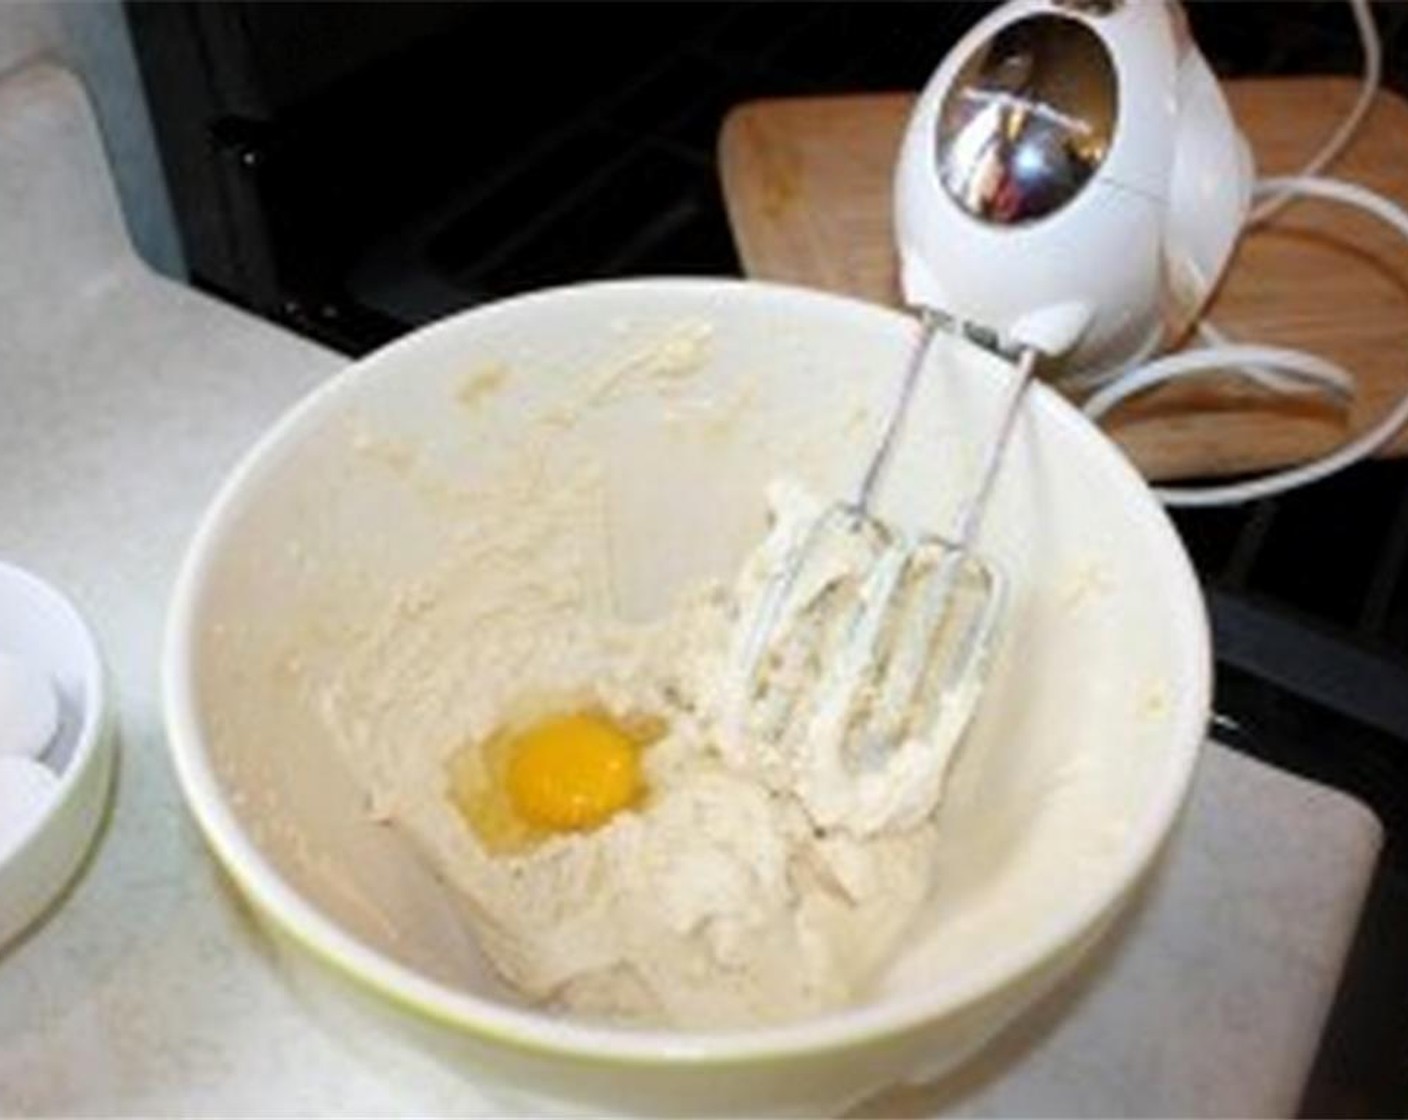 step 7 After you have a smooth and fluffy batter base, start adding the Eggs (6) one at a time and mix thoroughly.